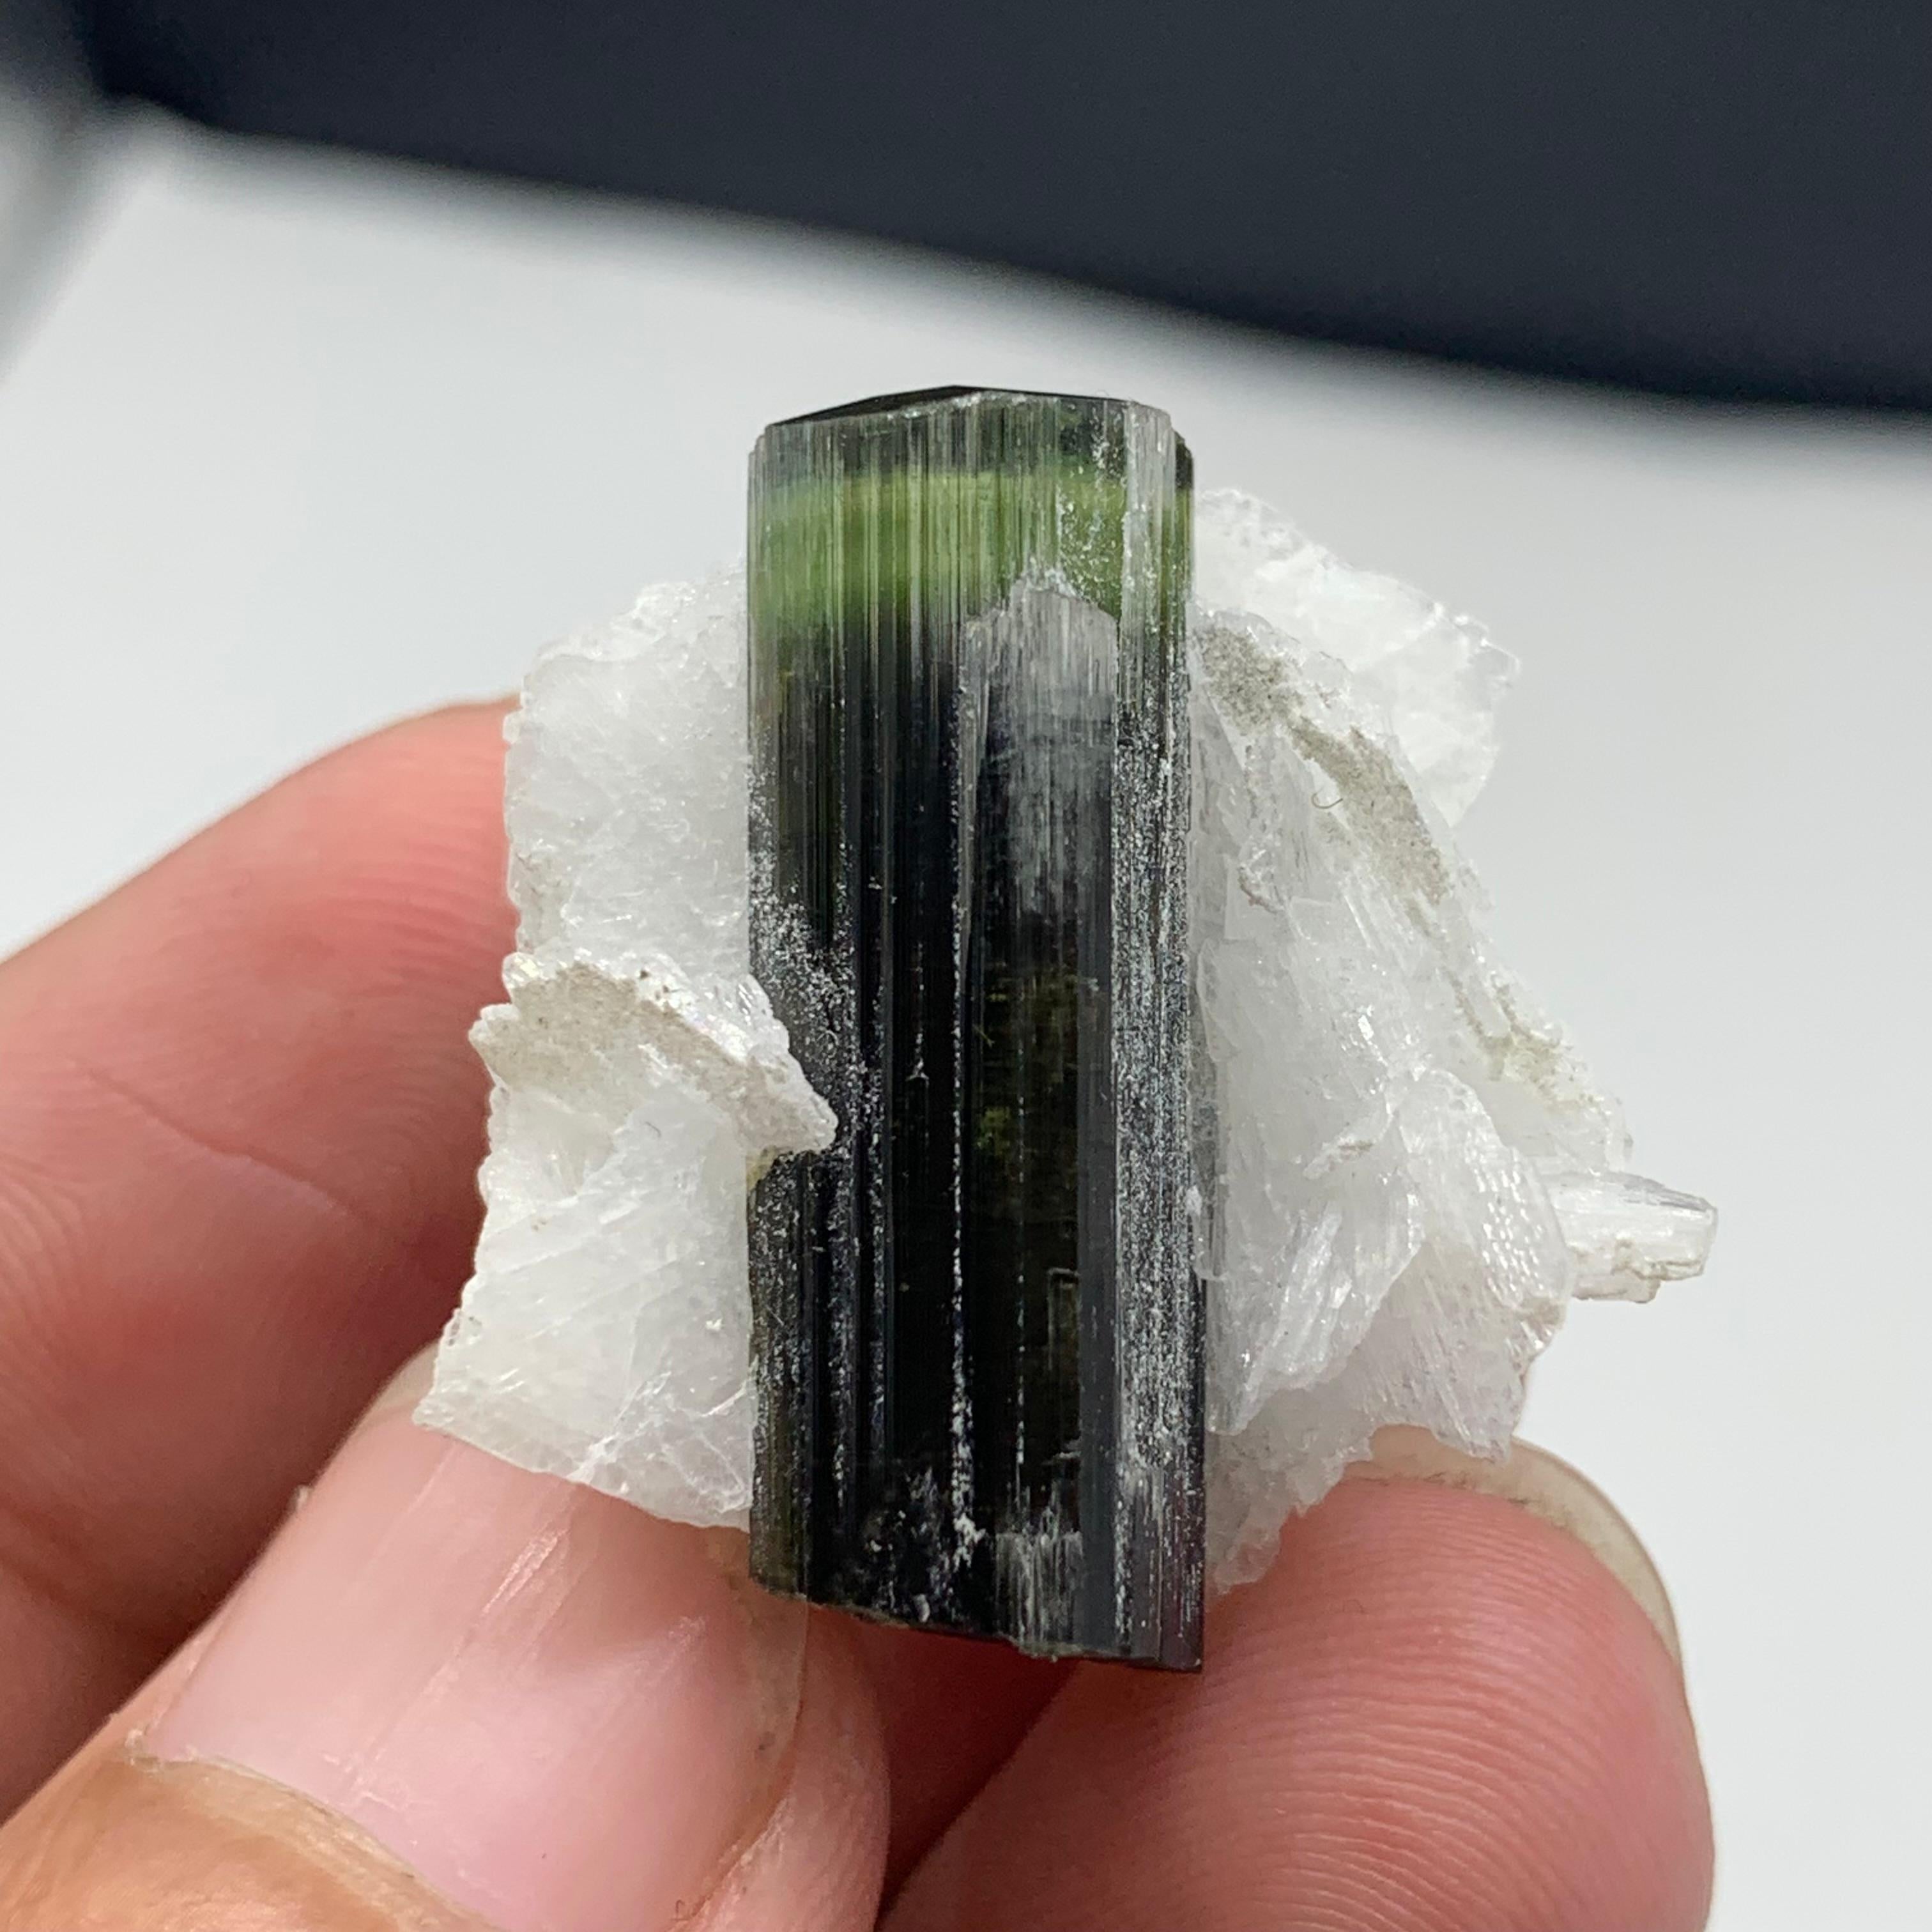 12.06 Gram Lovely Green Tourmaline Specimen From Skardu, Pakistan 

Weight: 12.06 Gram 
Dimension: 2.7 x 2.6 x 1.9 Cm 
Origin: Skardu, Pakistan 

Tourmaline is a name applied to a family of related minerals with widely varying properties.